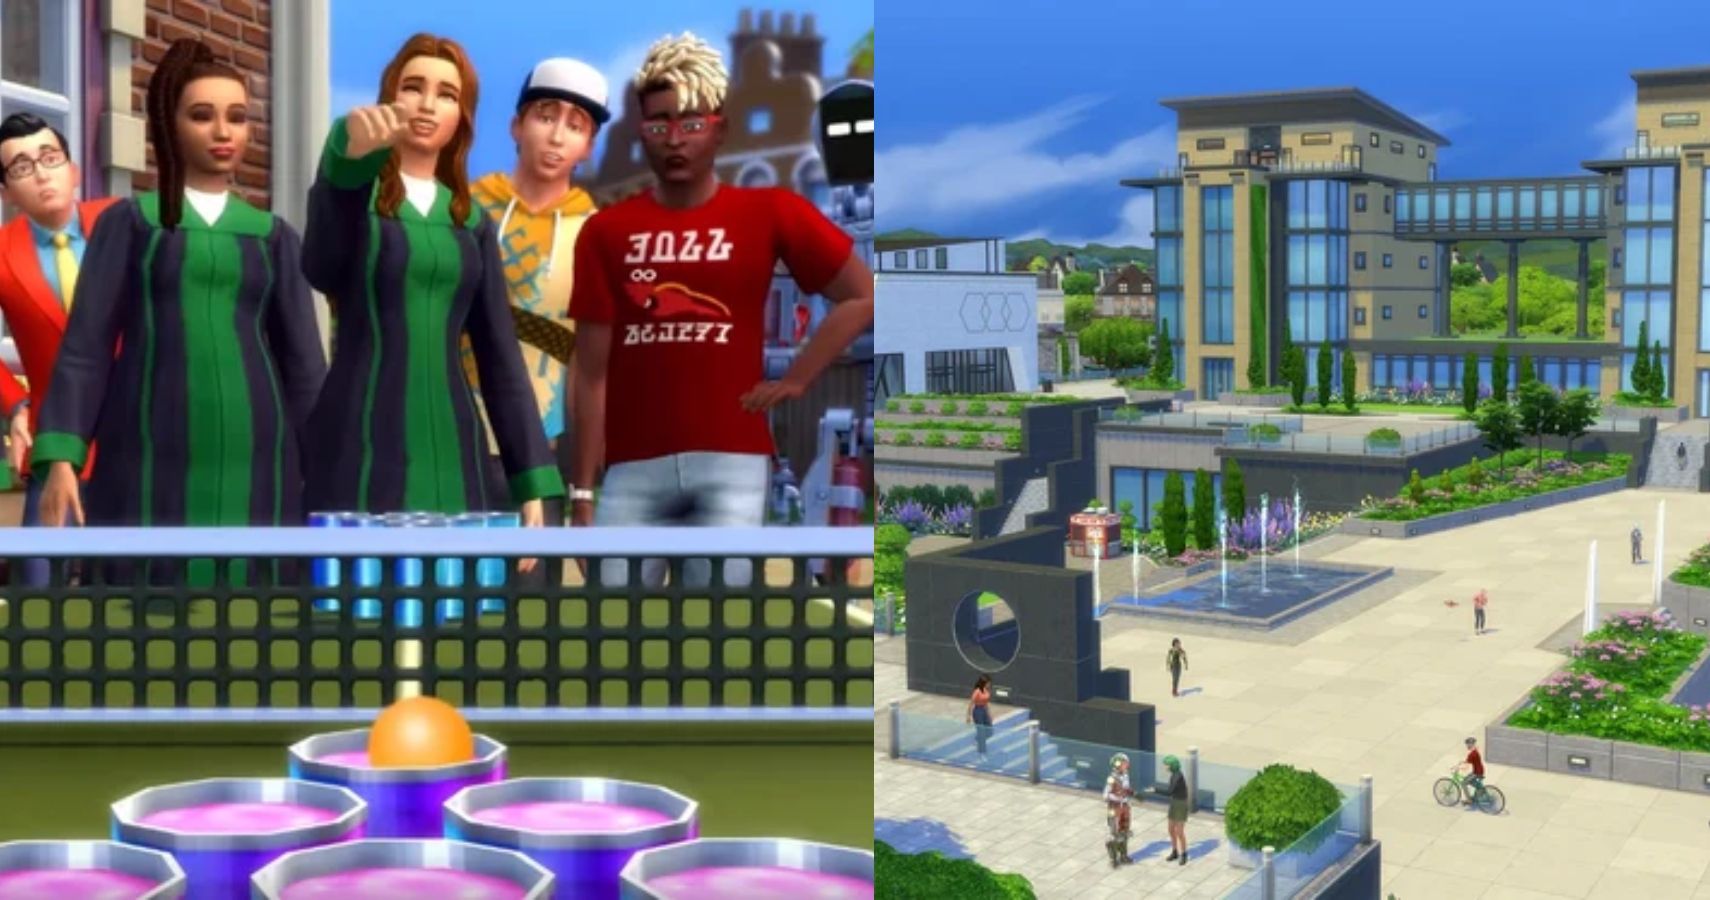 sims-4-discover-university-10-confirmed-things-from-the-trailer